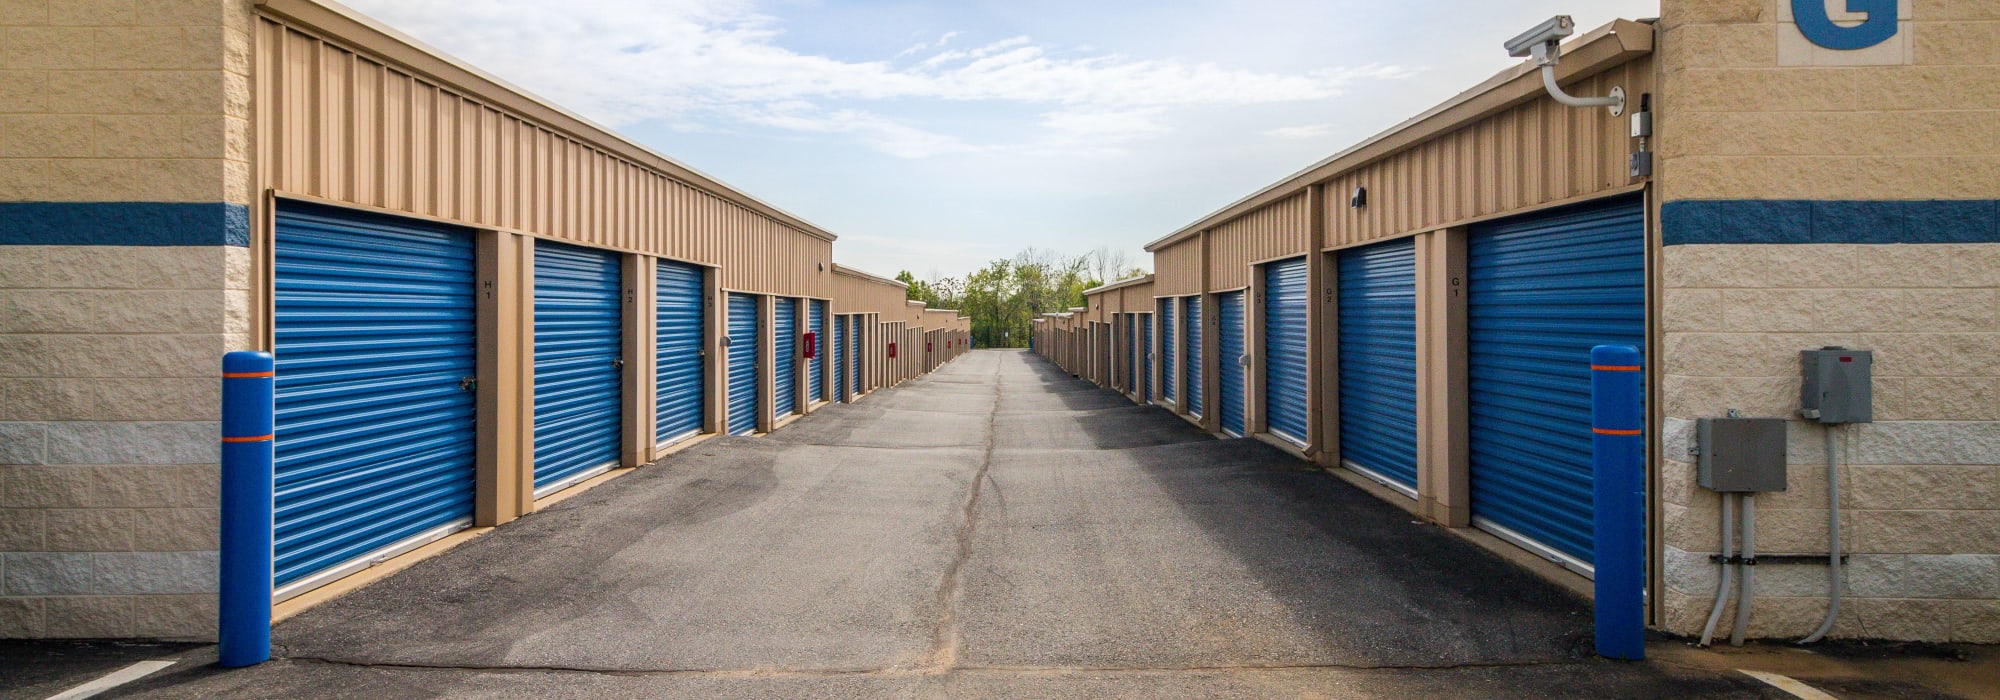 Hours and Directions at YourSpace Storage @ Rolling Road in Windsor Mill, Maryland